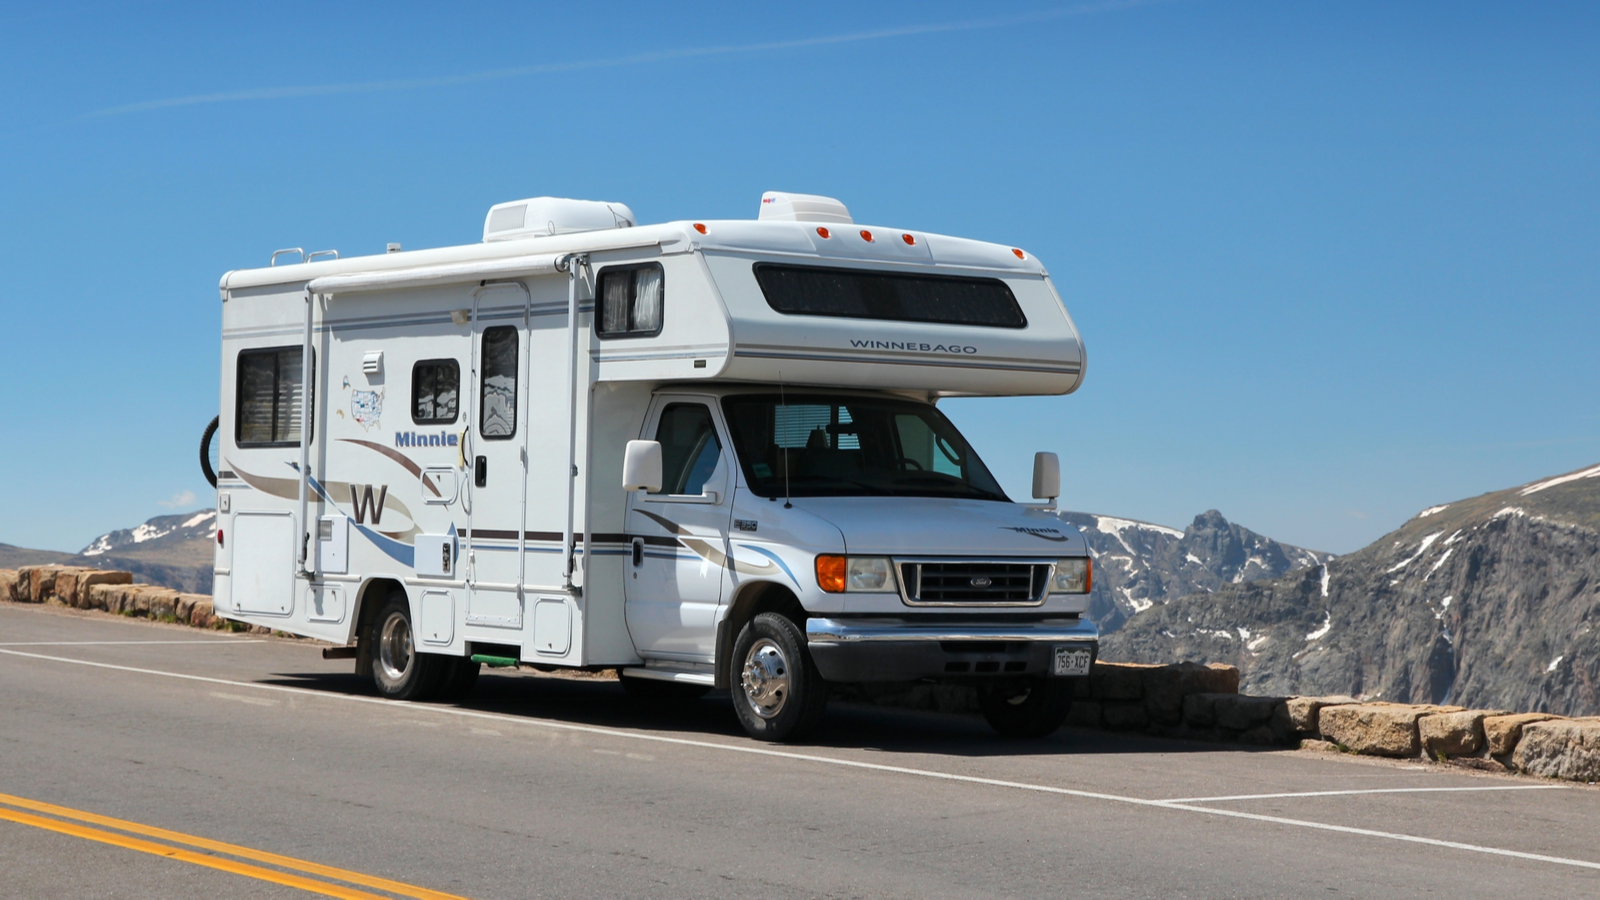 A photo of an RV on the side of the road representing WGO stock.